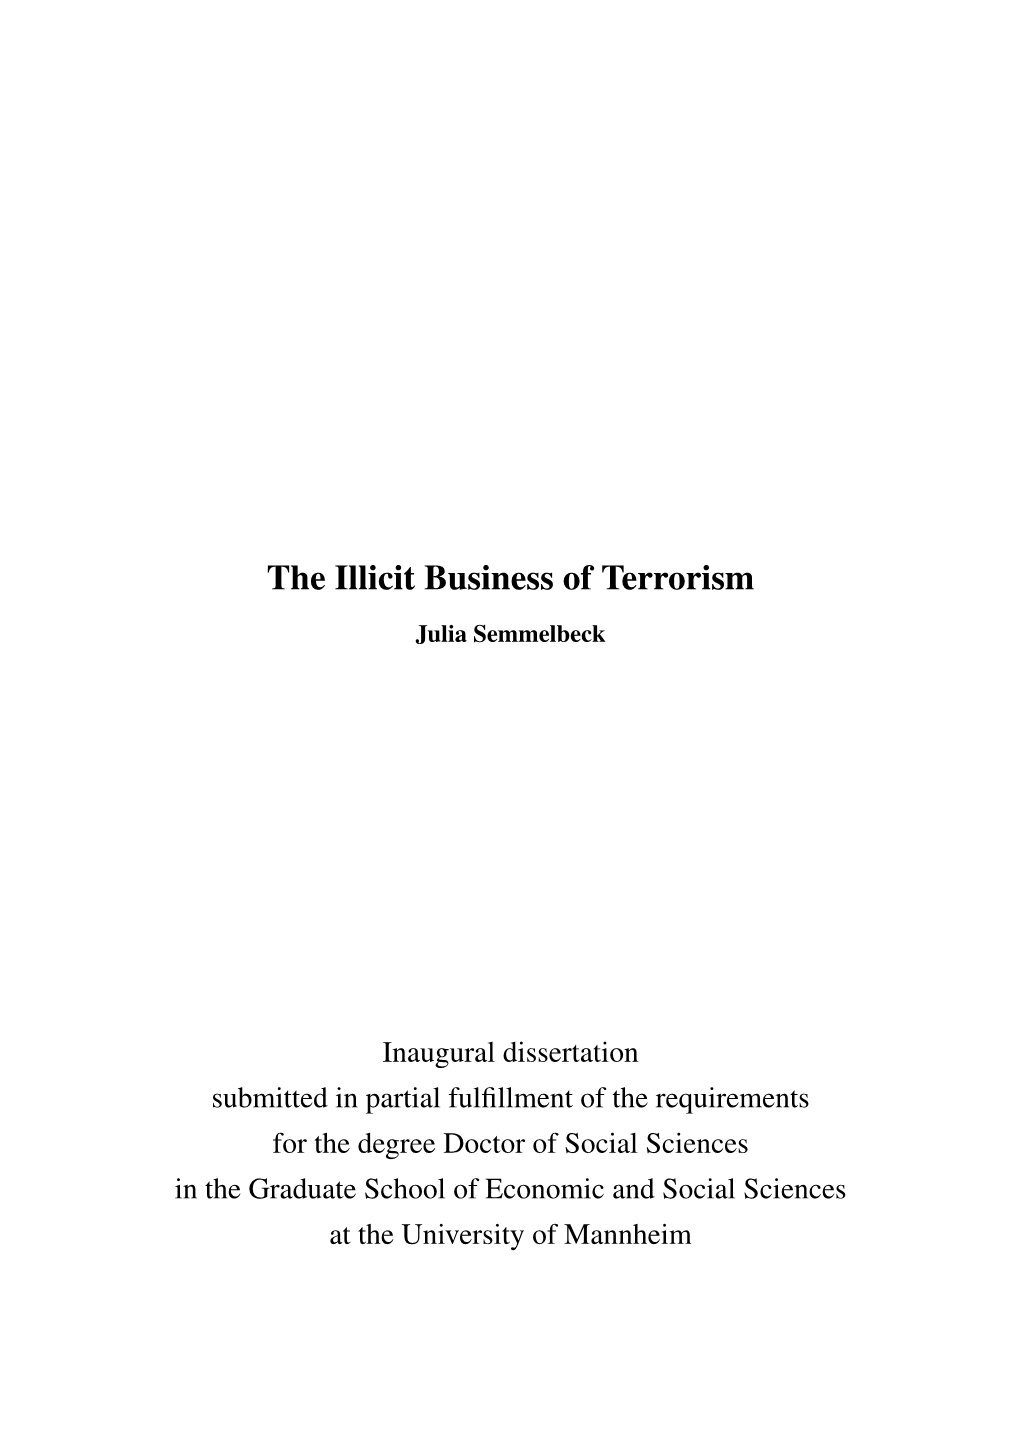 The Illicit Business of Terrorism